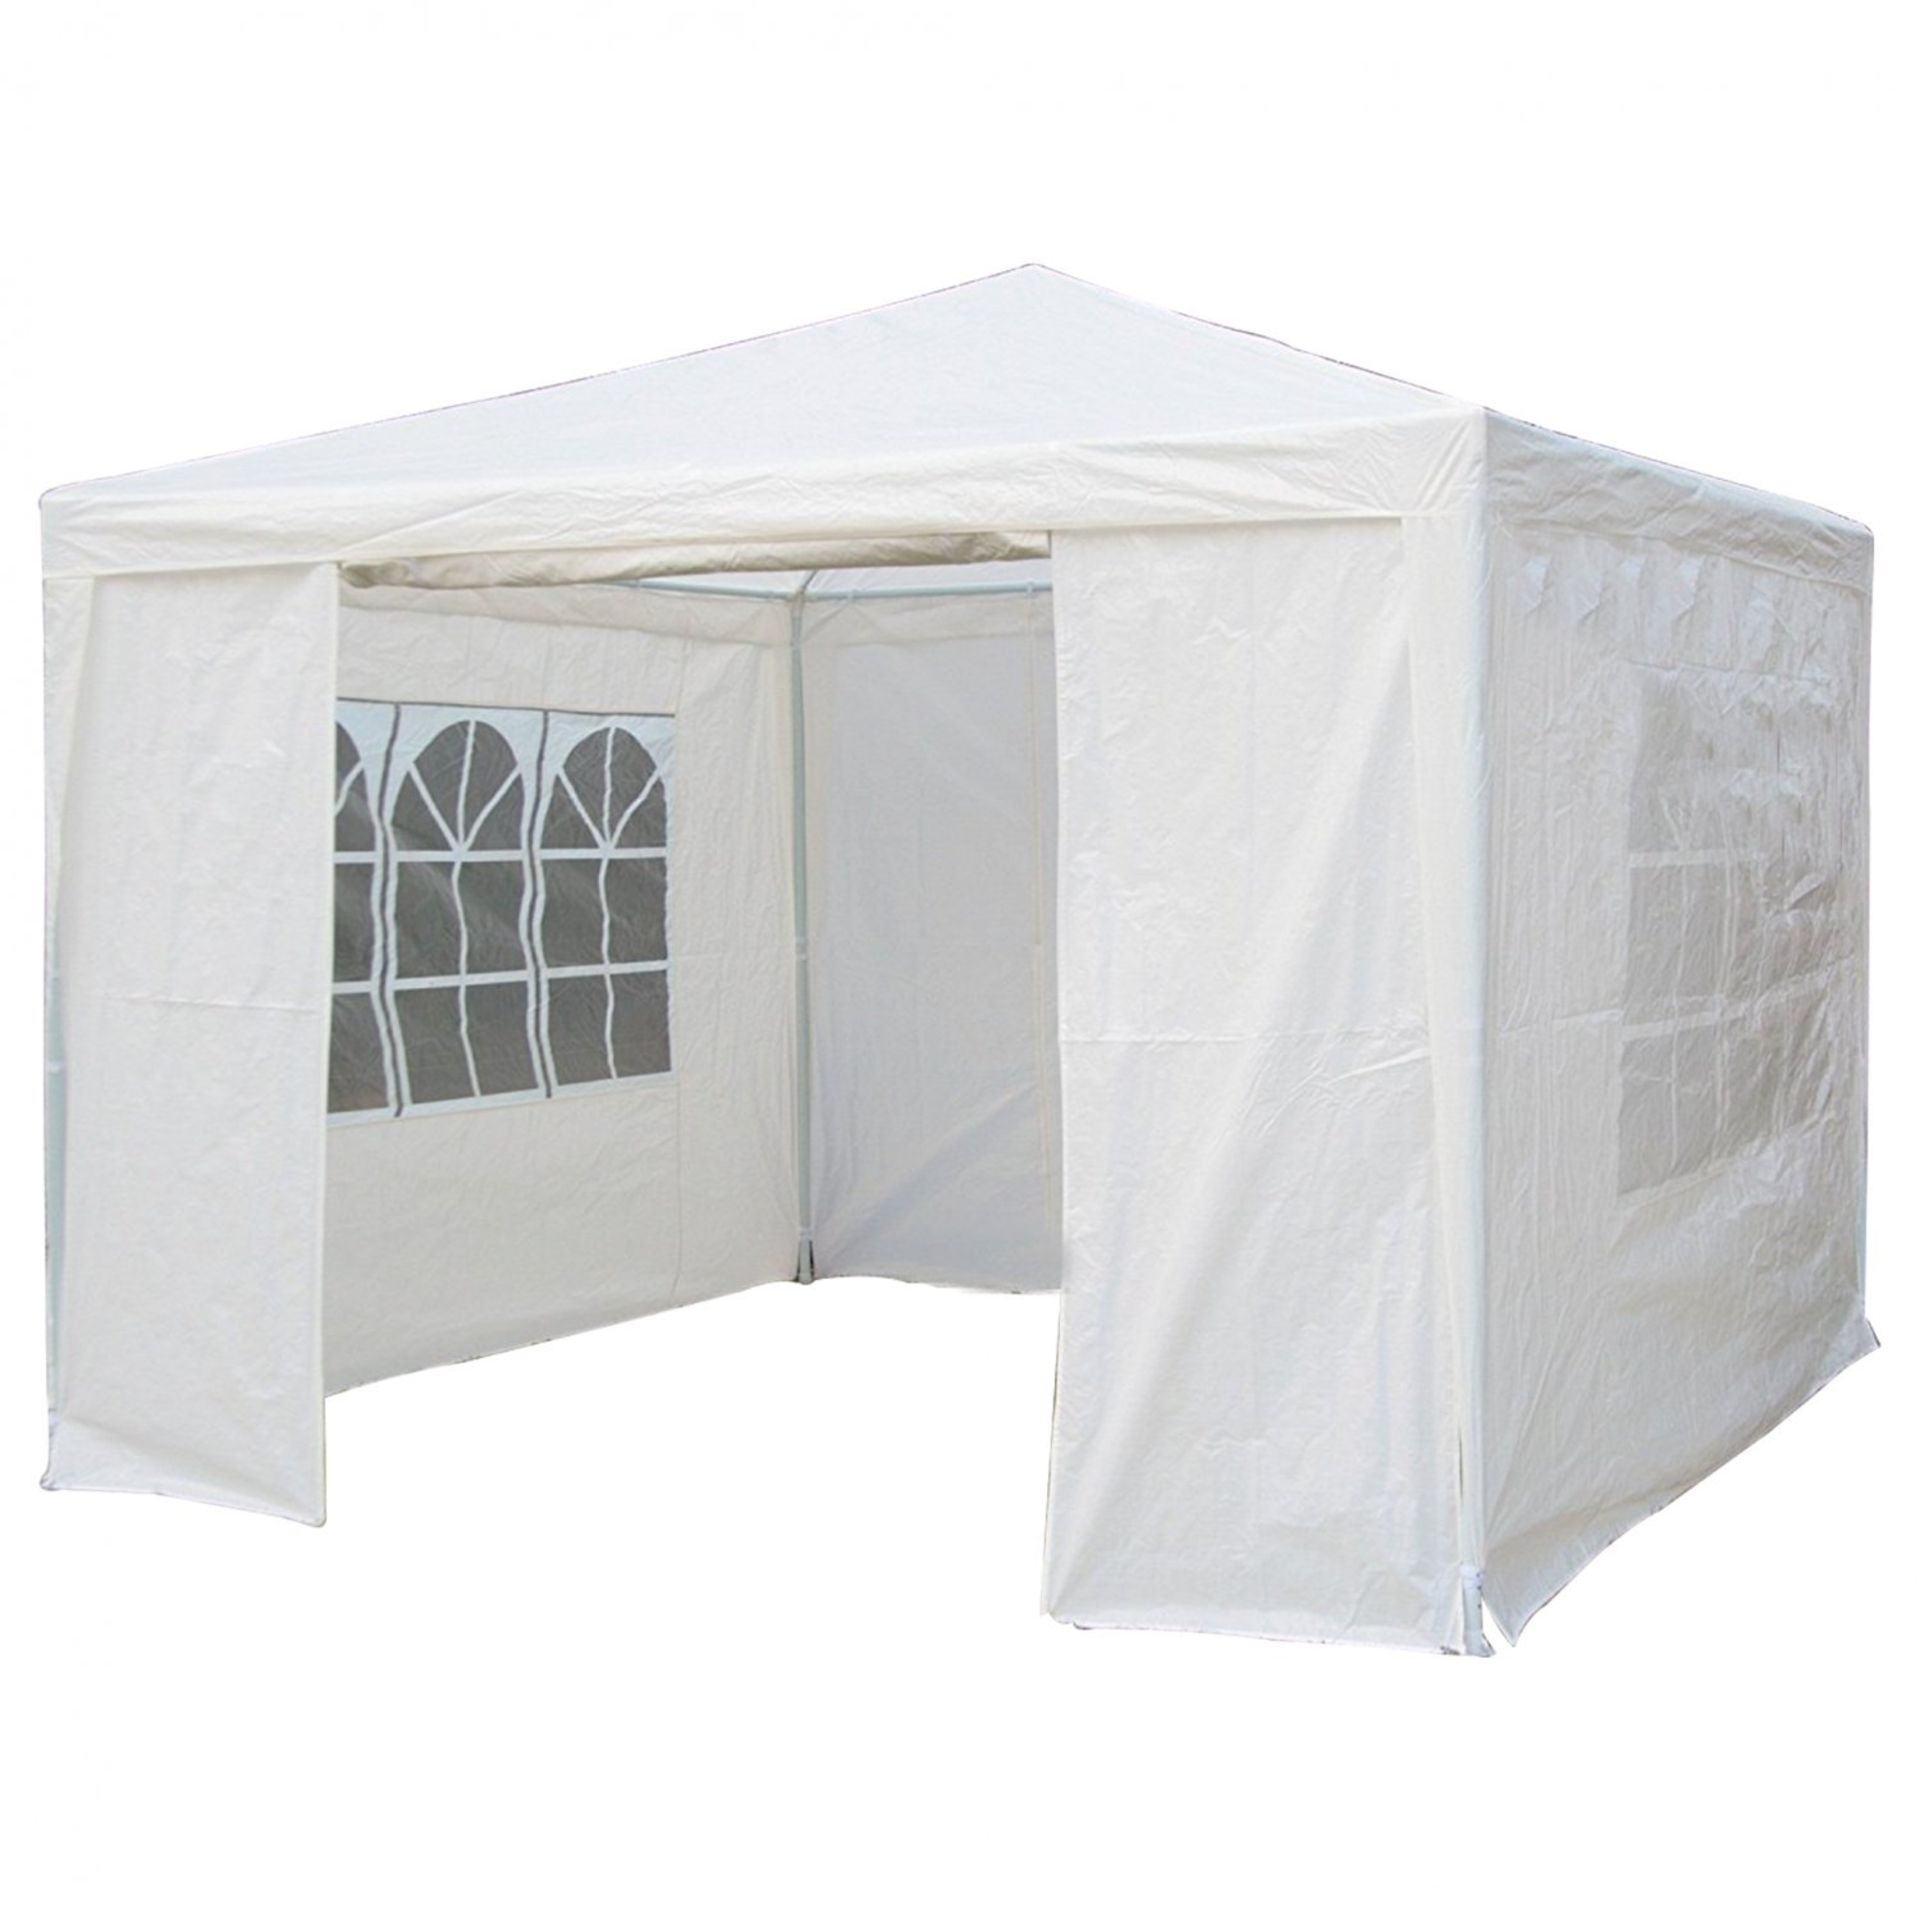 (EE531) 3m x 3m White Waterproof Garden Gazebo Marquee Awning Tent Zipped Door & 2 Removable W... - Image 2 of 3